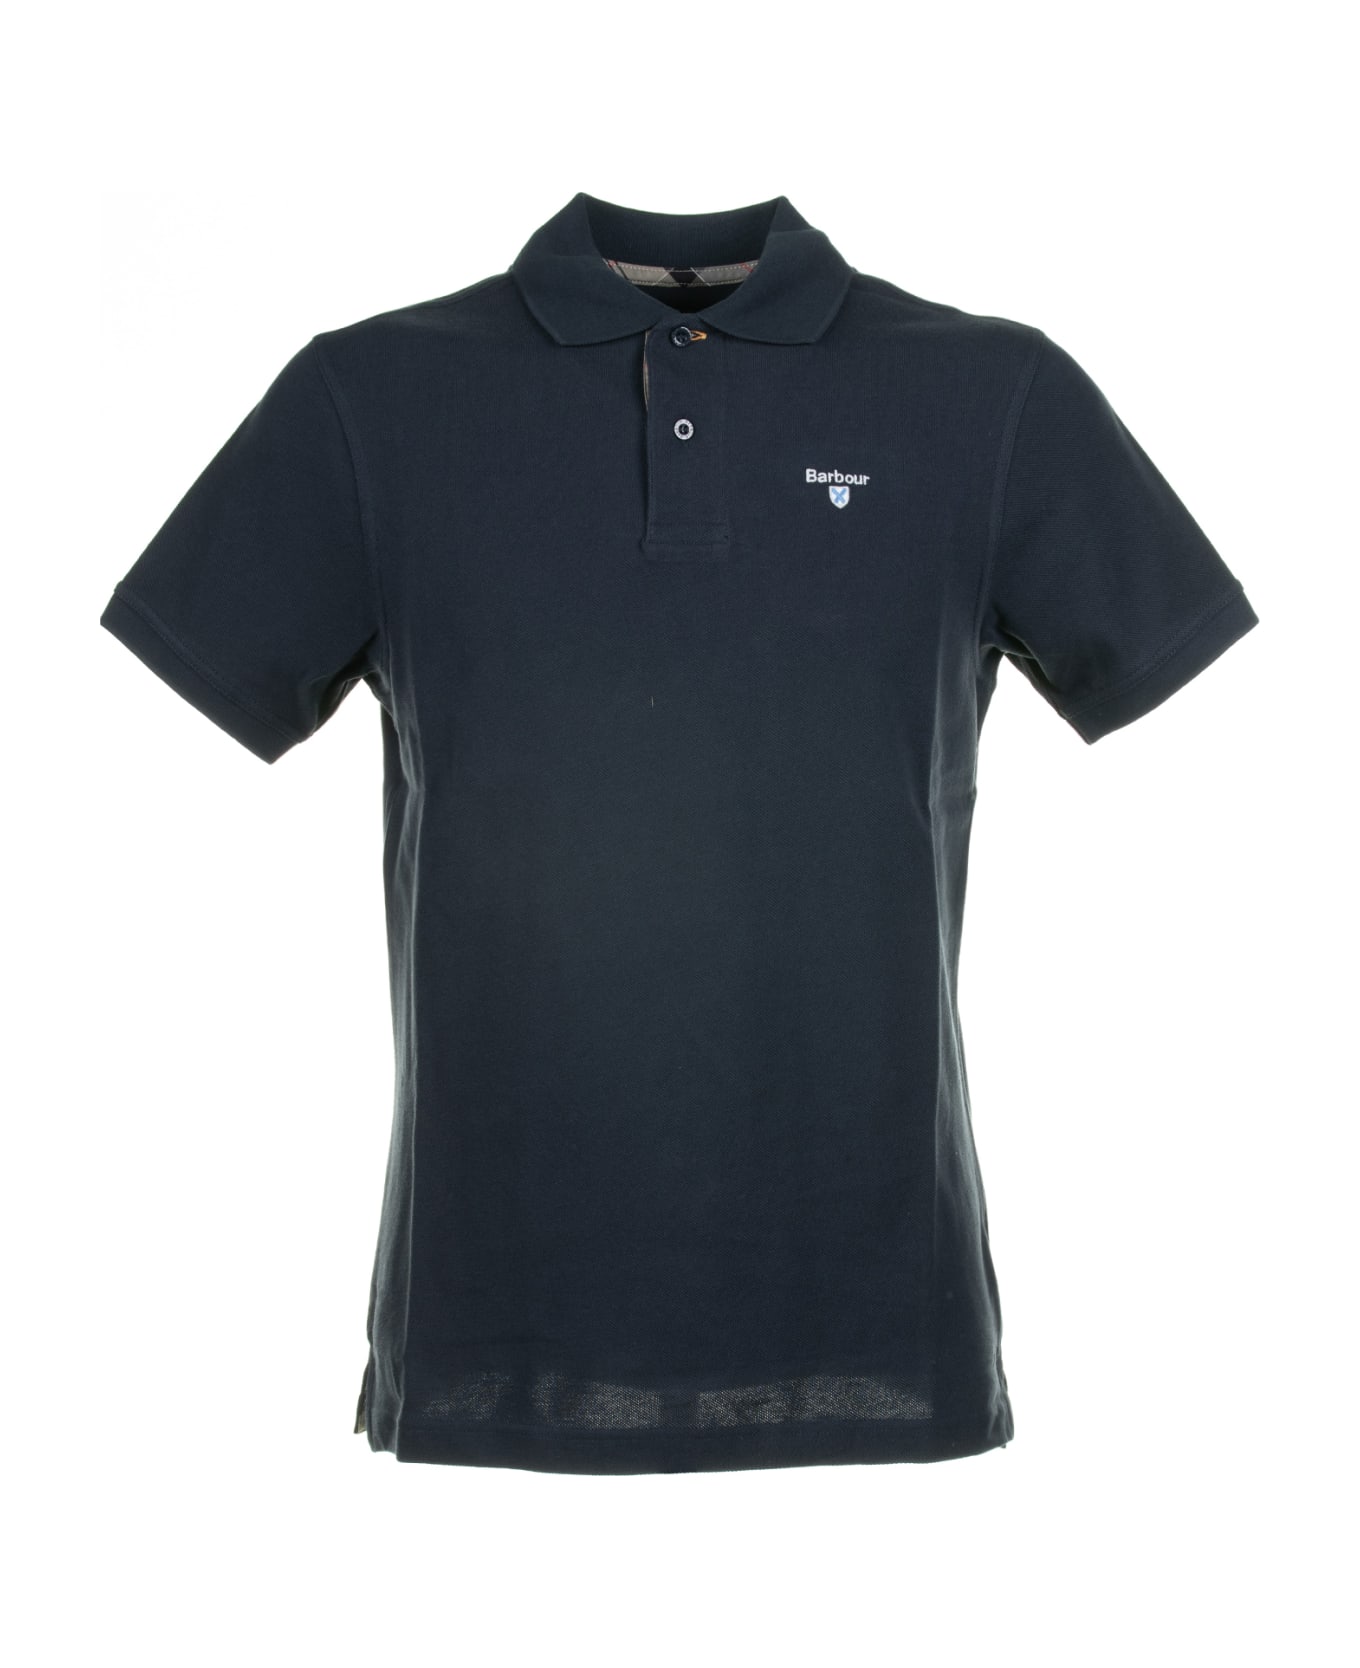 Barbour Navy Blue Short-sleeved Piqué Polo Shirt - NEW NAVY ポロシャツ